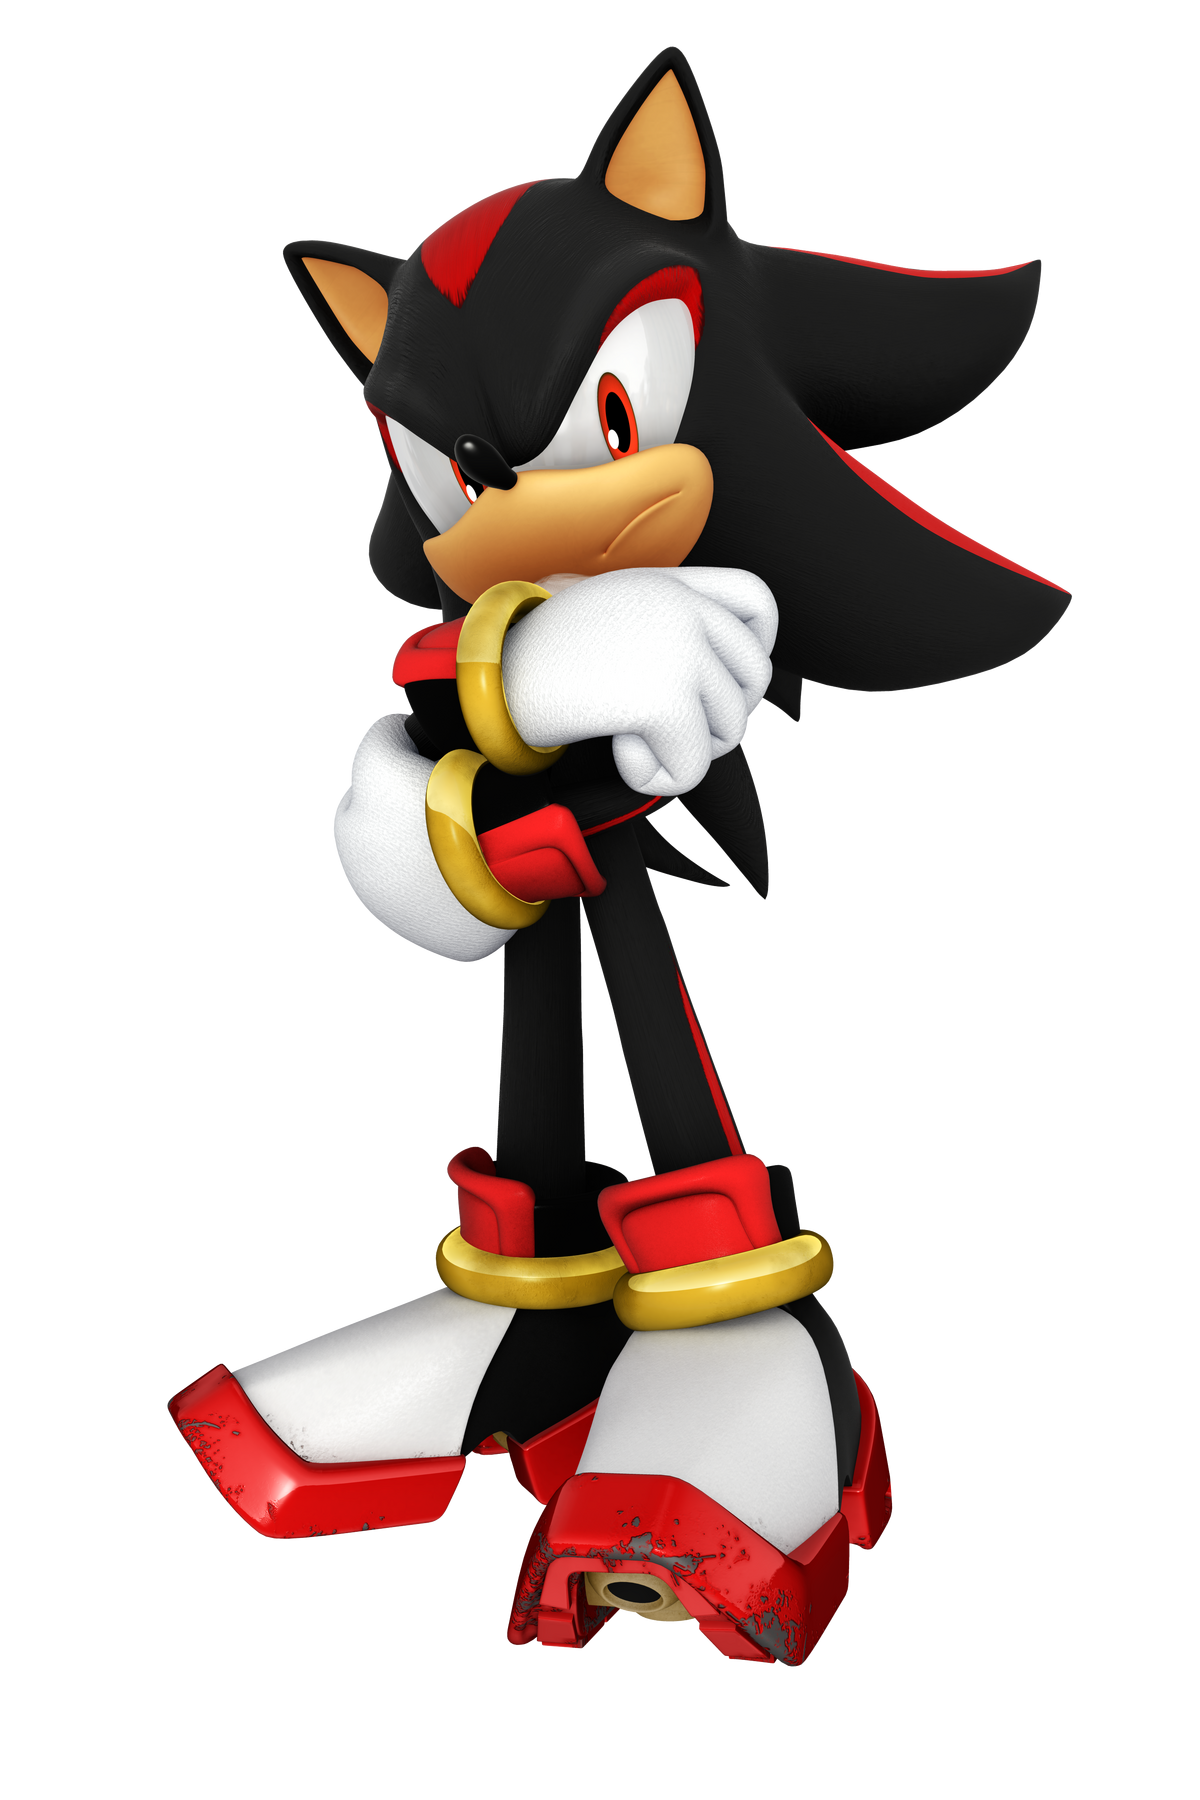 Shadow The Hedgehog must have an upgrade in his immortality status in  Fandom Wiki : r/SonicTheHedgehog